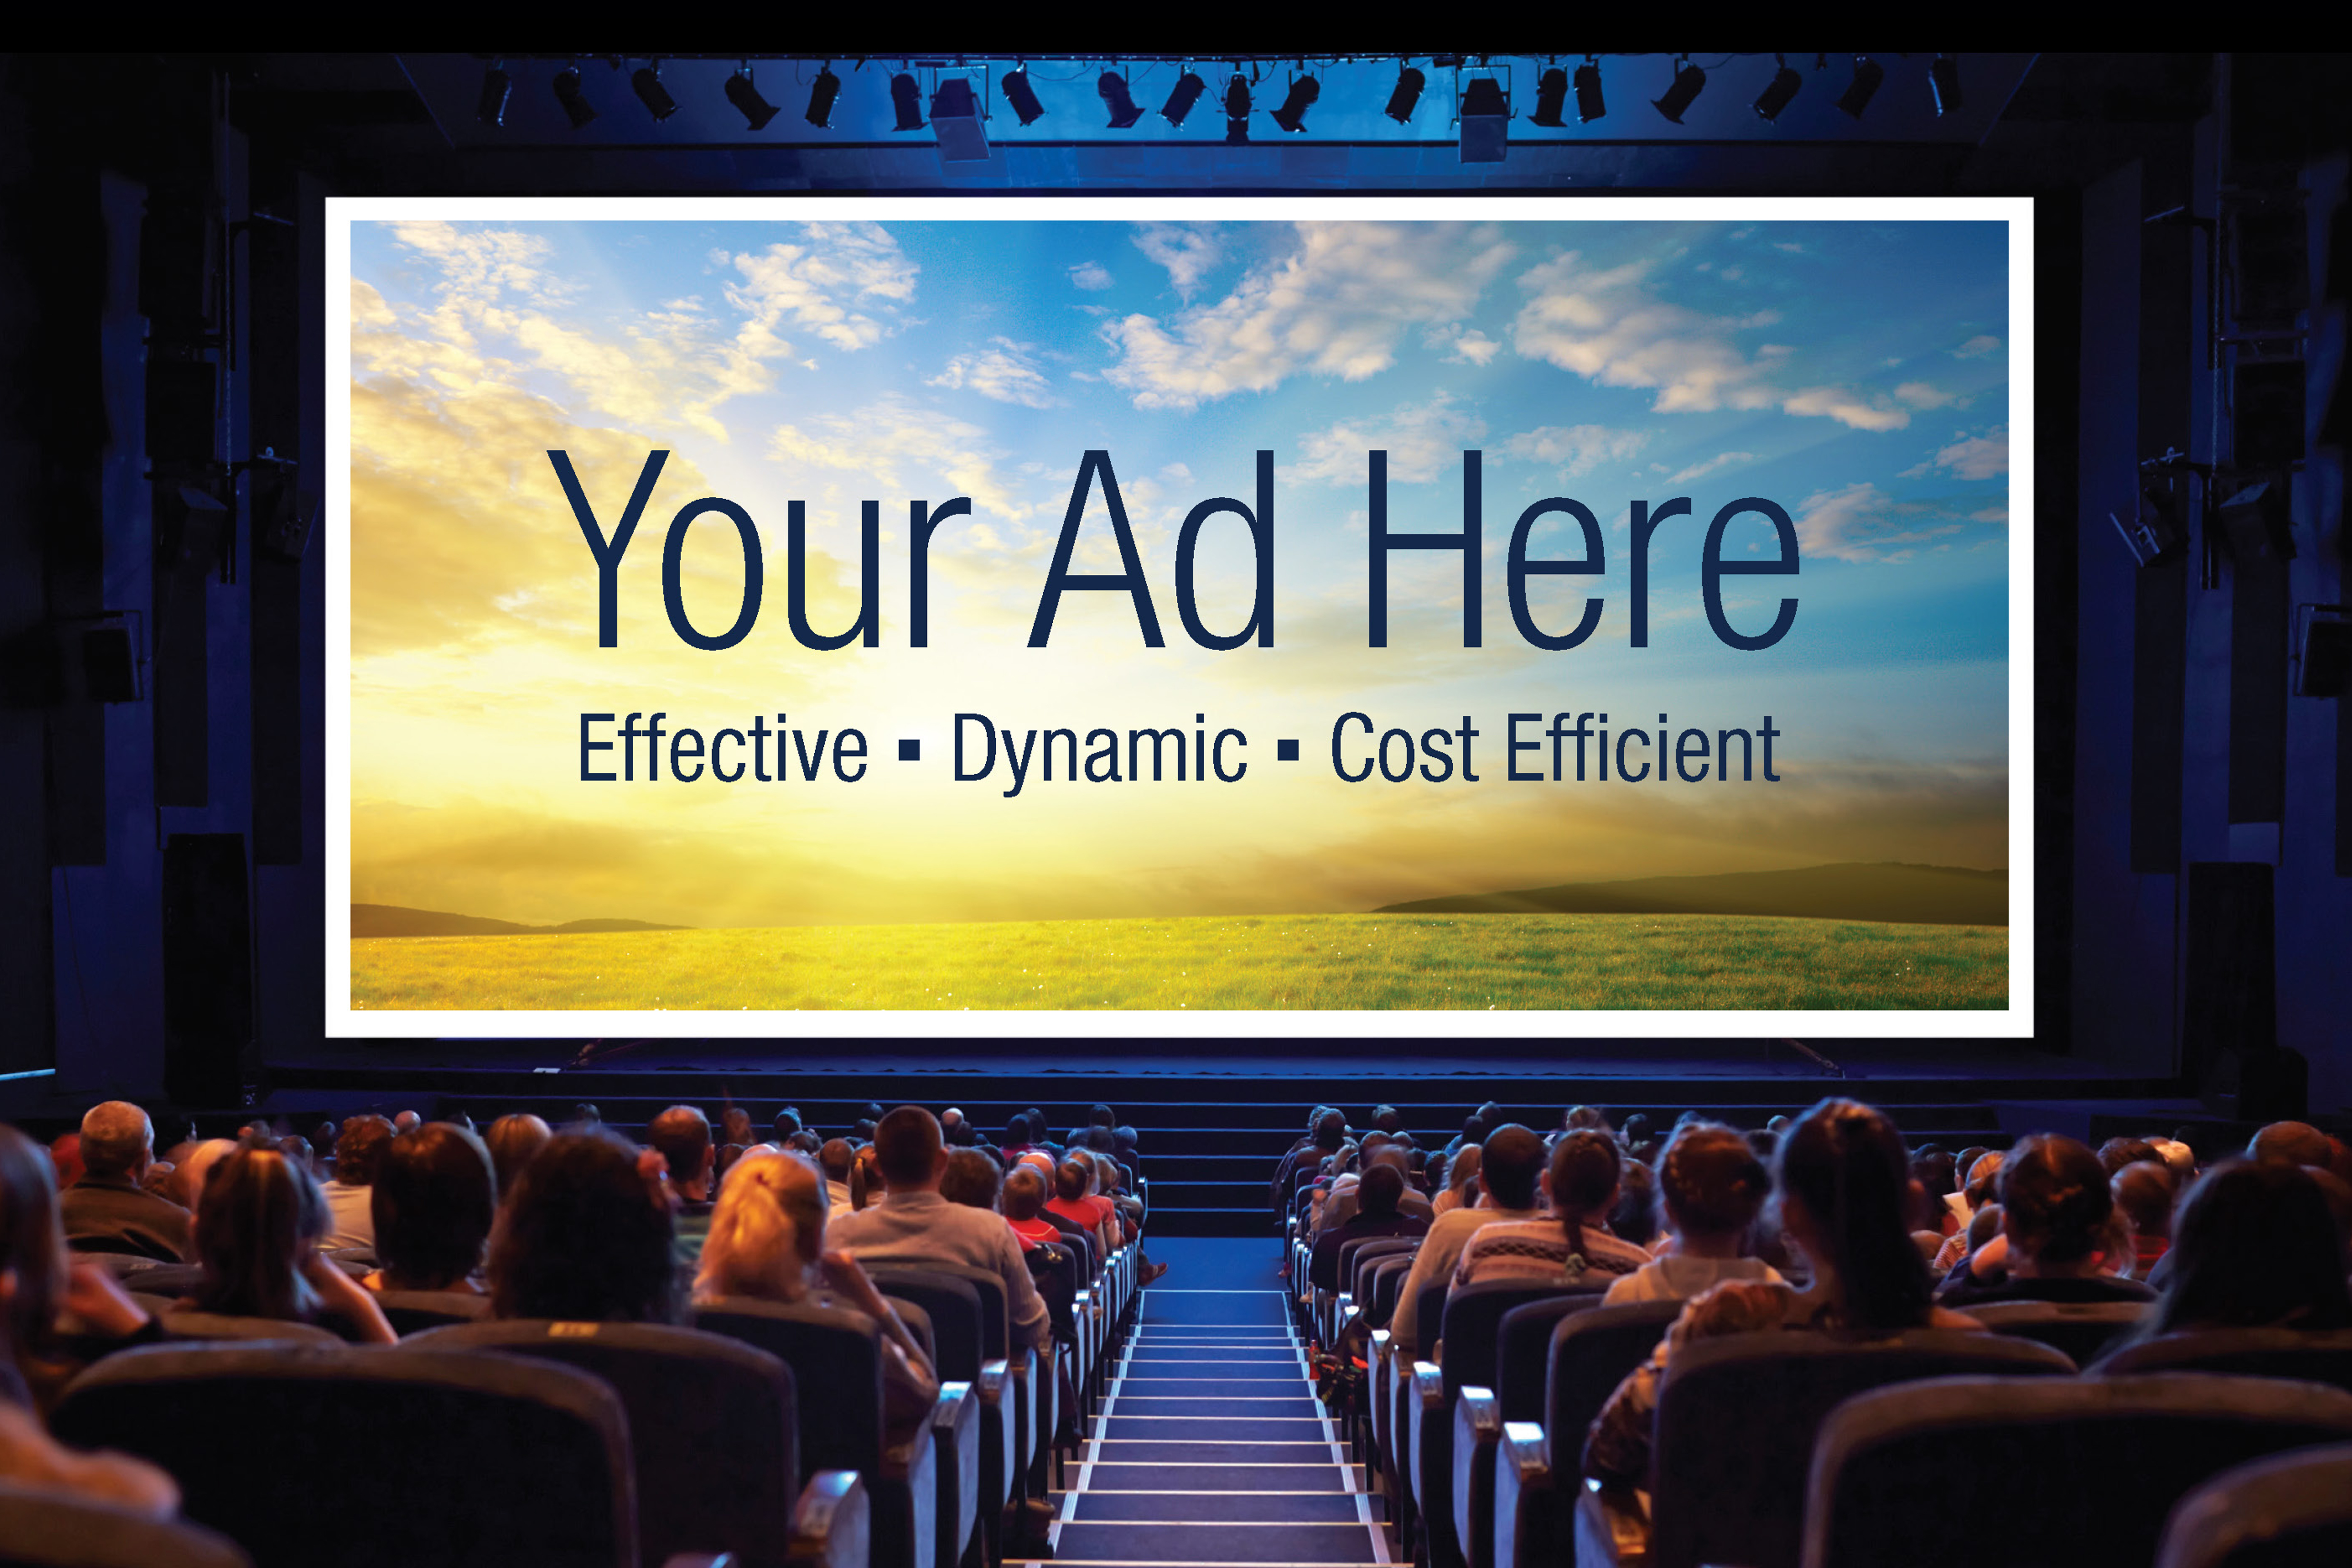 Your Ad Hear Pre-Screen advertising